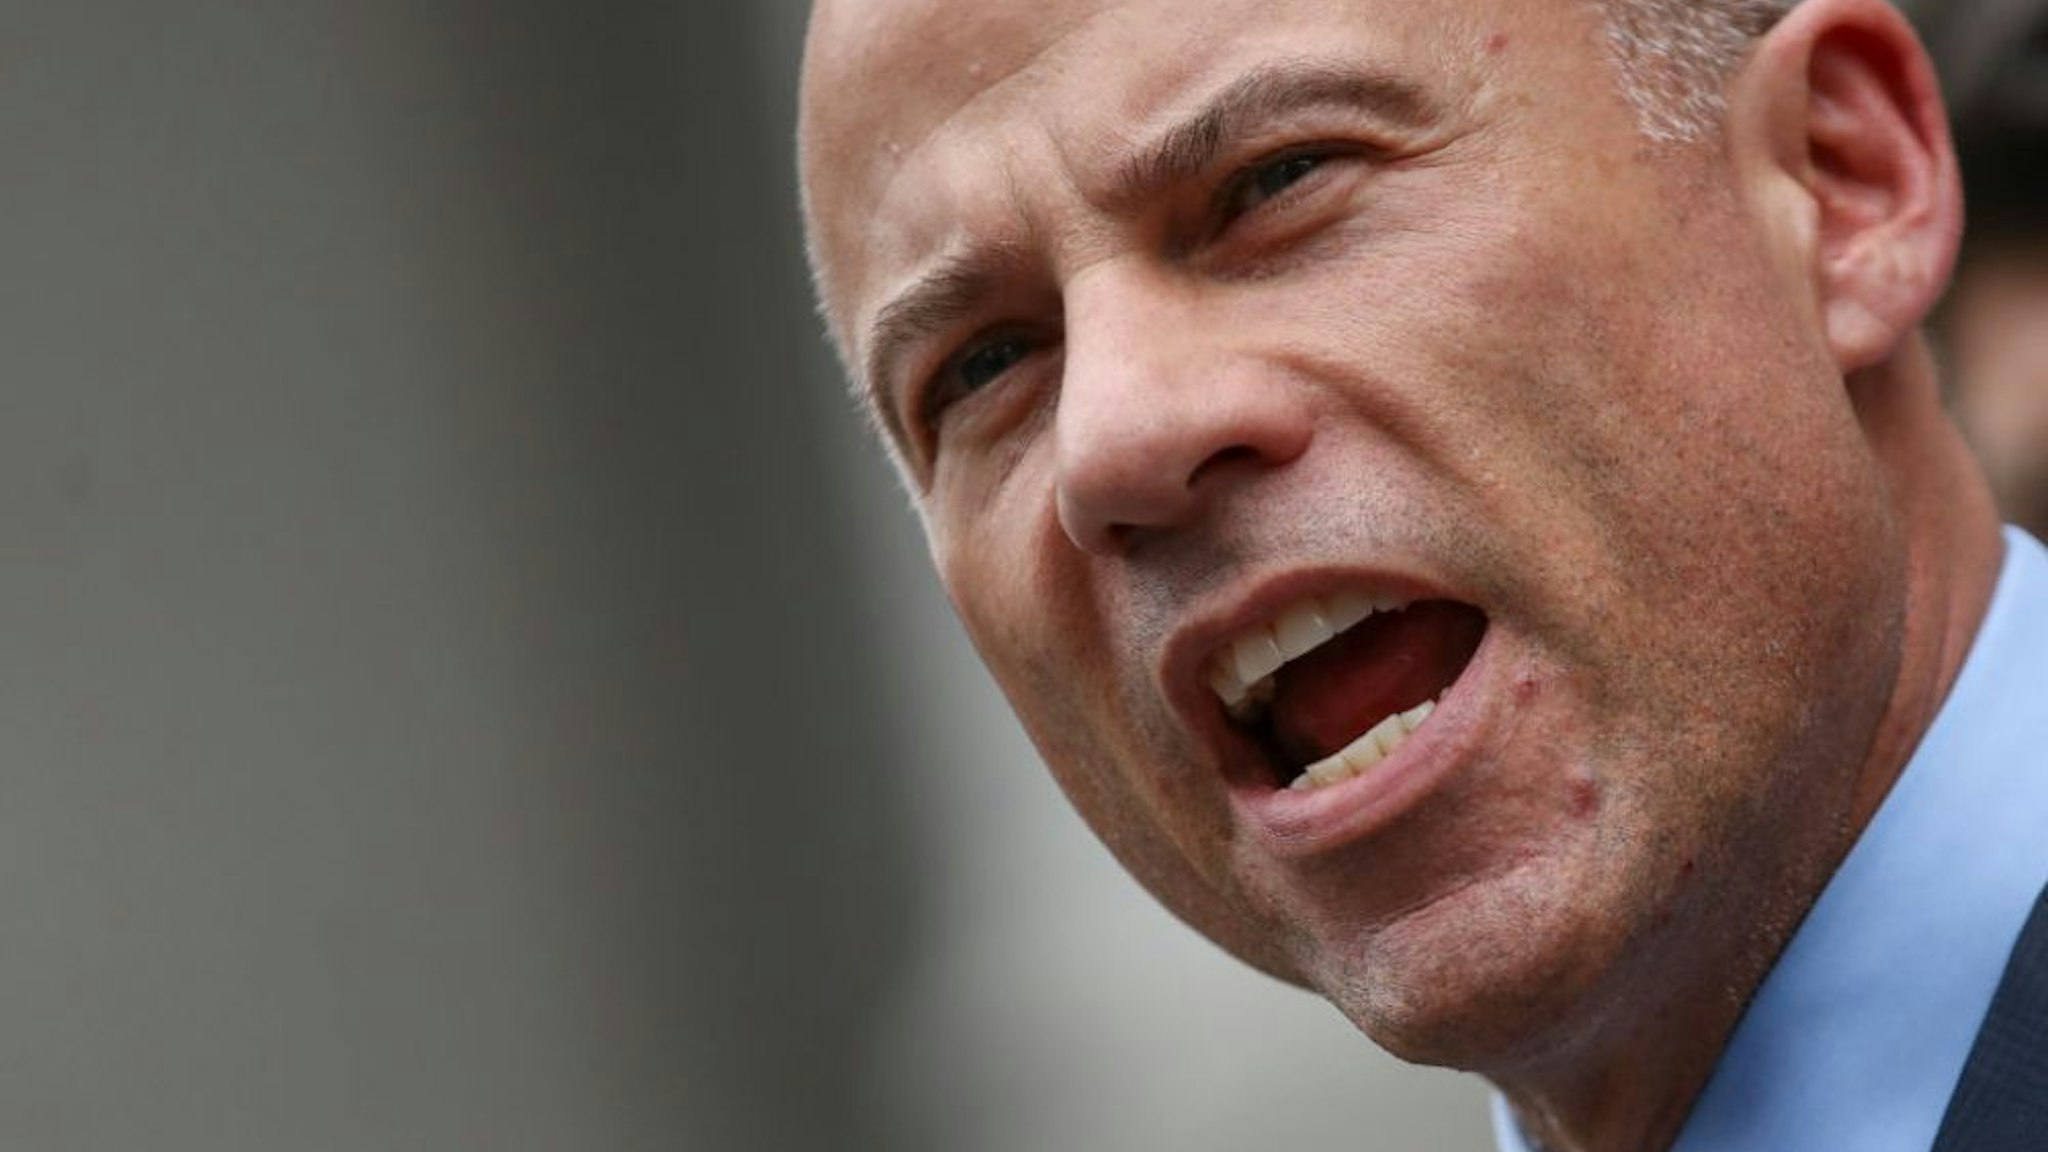 NEW YORK, NY - MAY 28: Attorney Michael Avenatti speaks to the press outside federal court after being arraigned, May 28, 2019 in New York City. Avenatti was arraigned on charges that he stole nearly $300,000 from adult film actress Stormy Daniels and on separate charges that he tried to extort up to $25 million Nike.